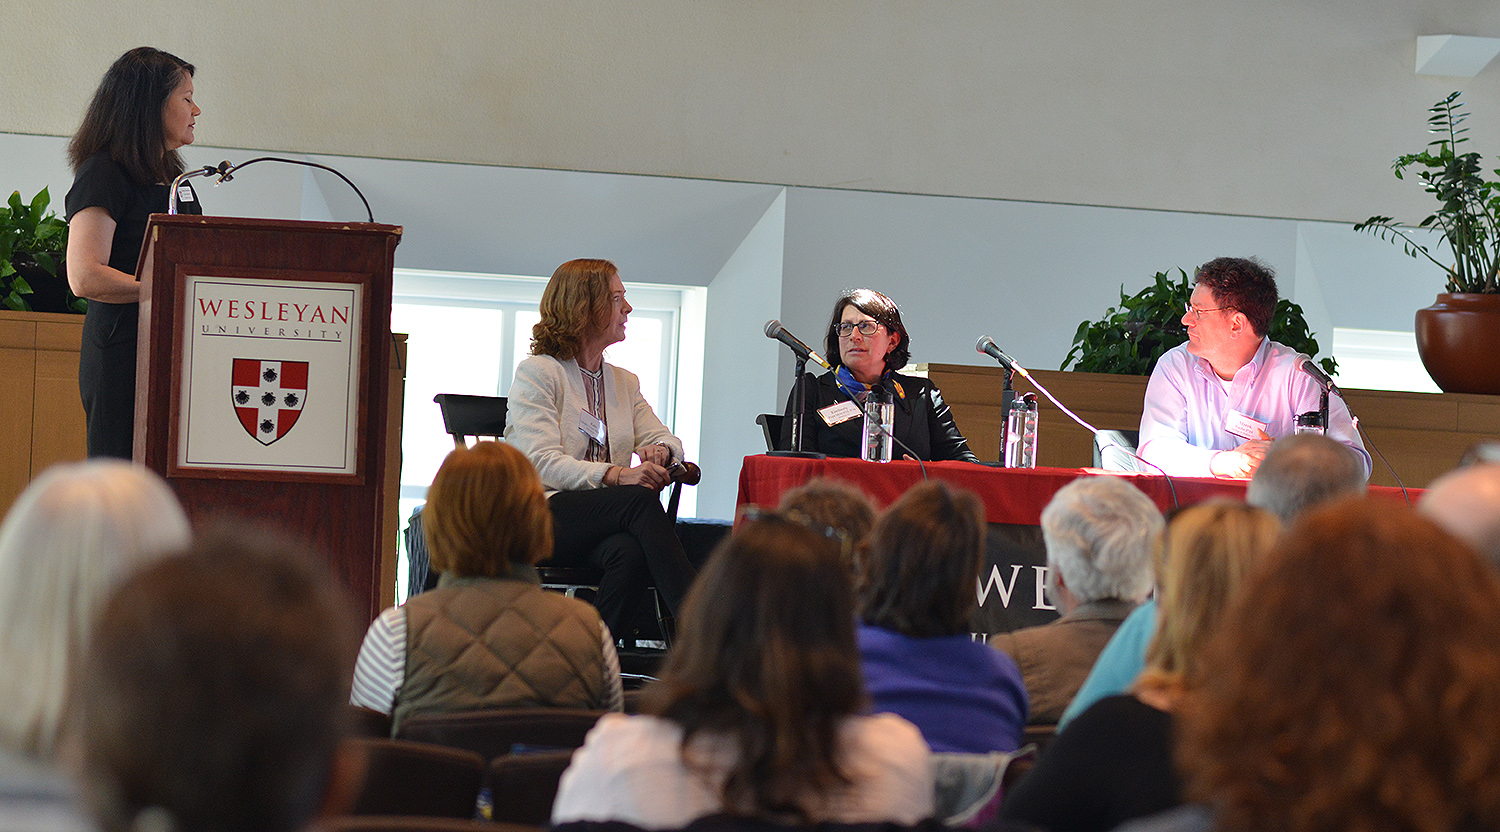 Prospective parents attended an interactive discussion with parents of current students. Kate Quigley Lynch '82, P'17, '19; Kimberly Pope MALS'14, P'19; and Marek Fuchs P'19 served as panelists and answered questions from the audience.